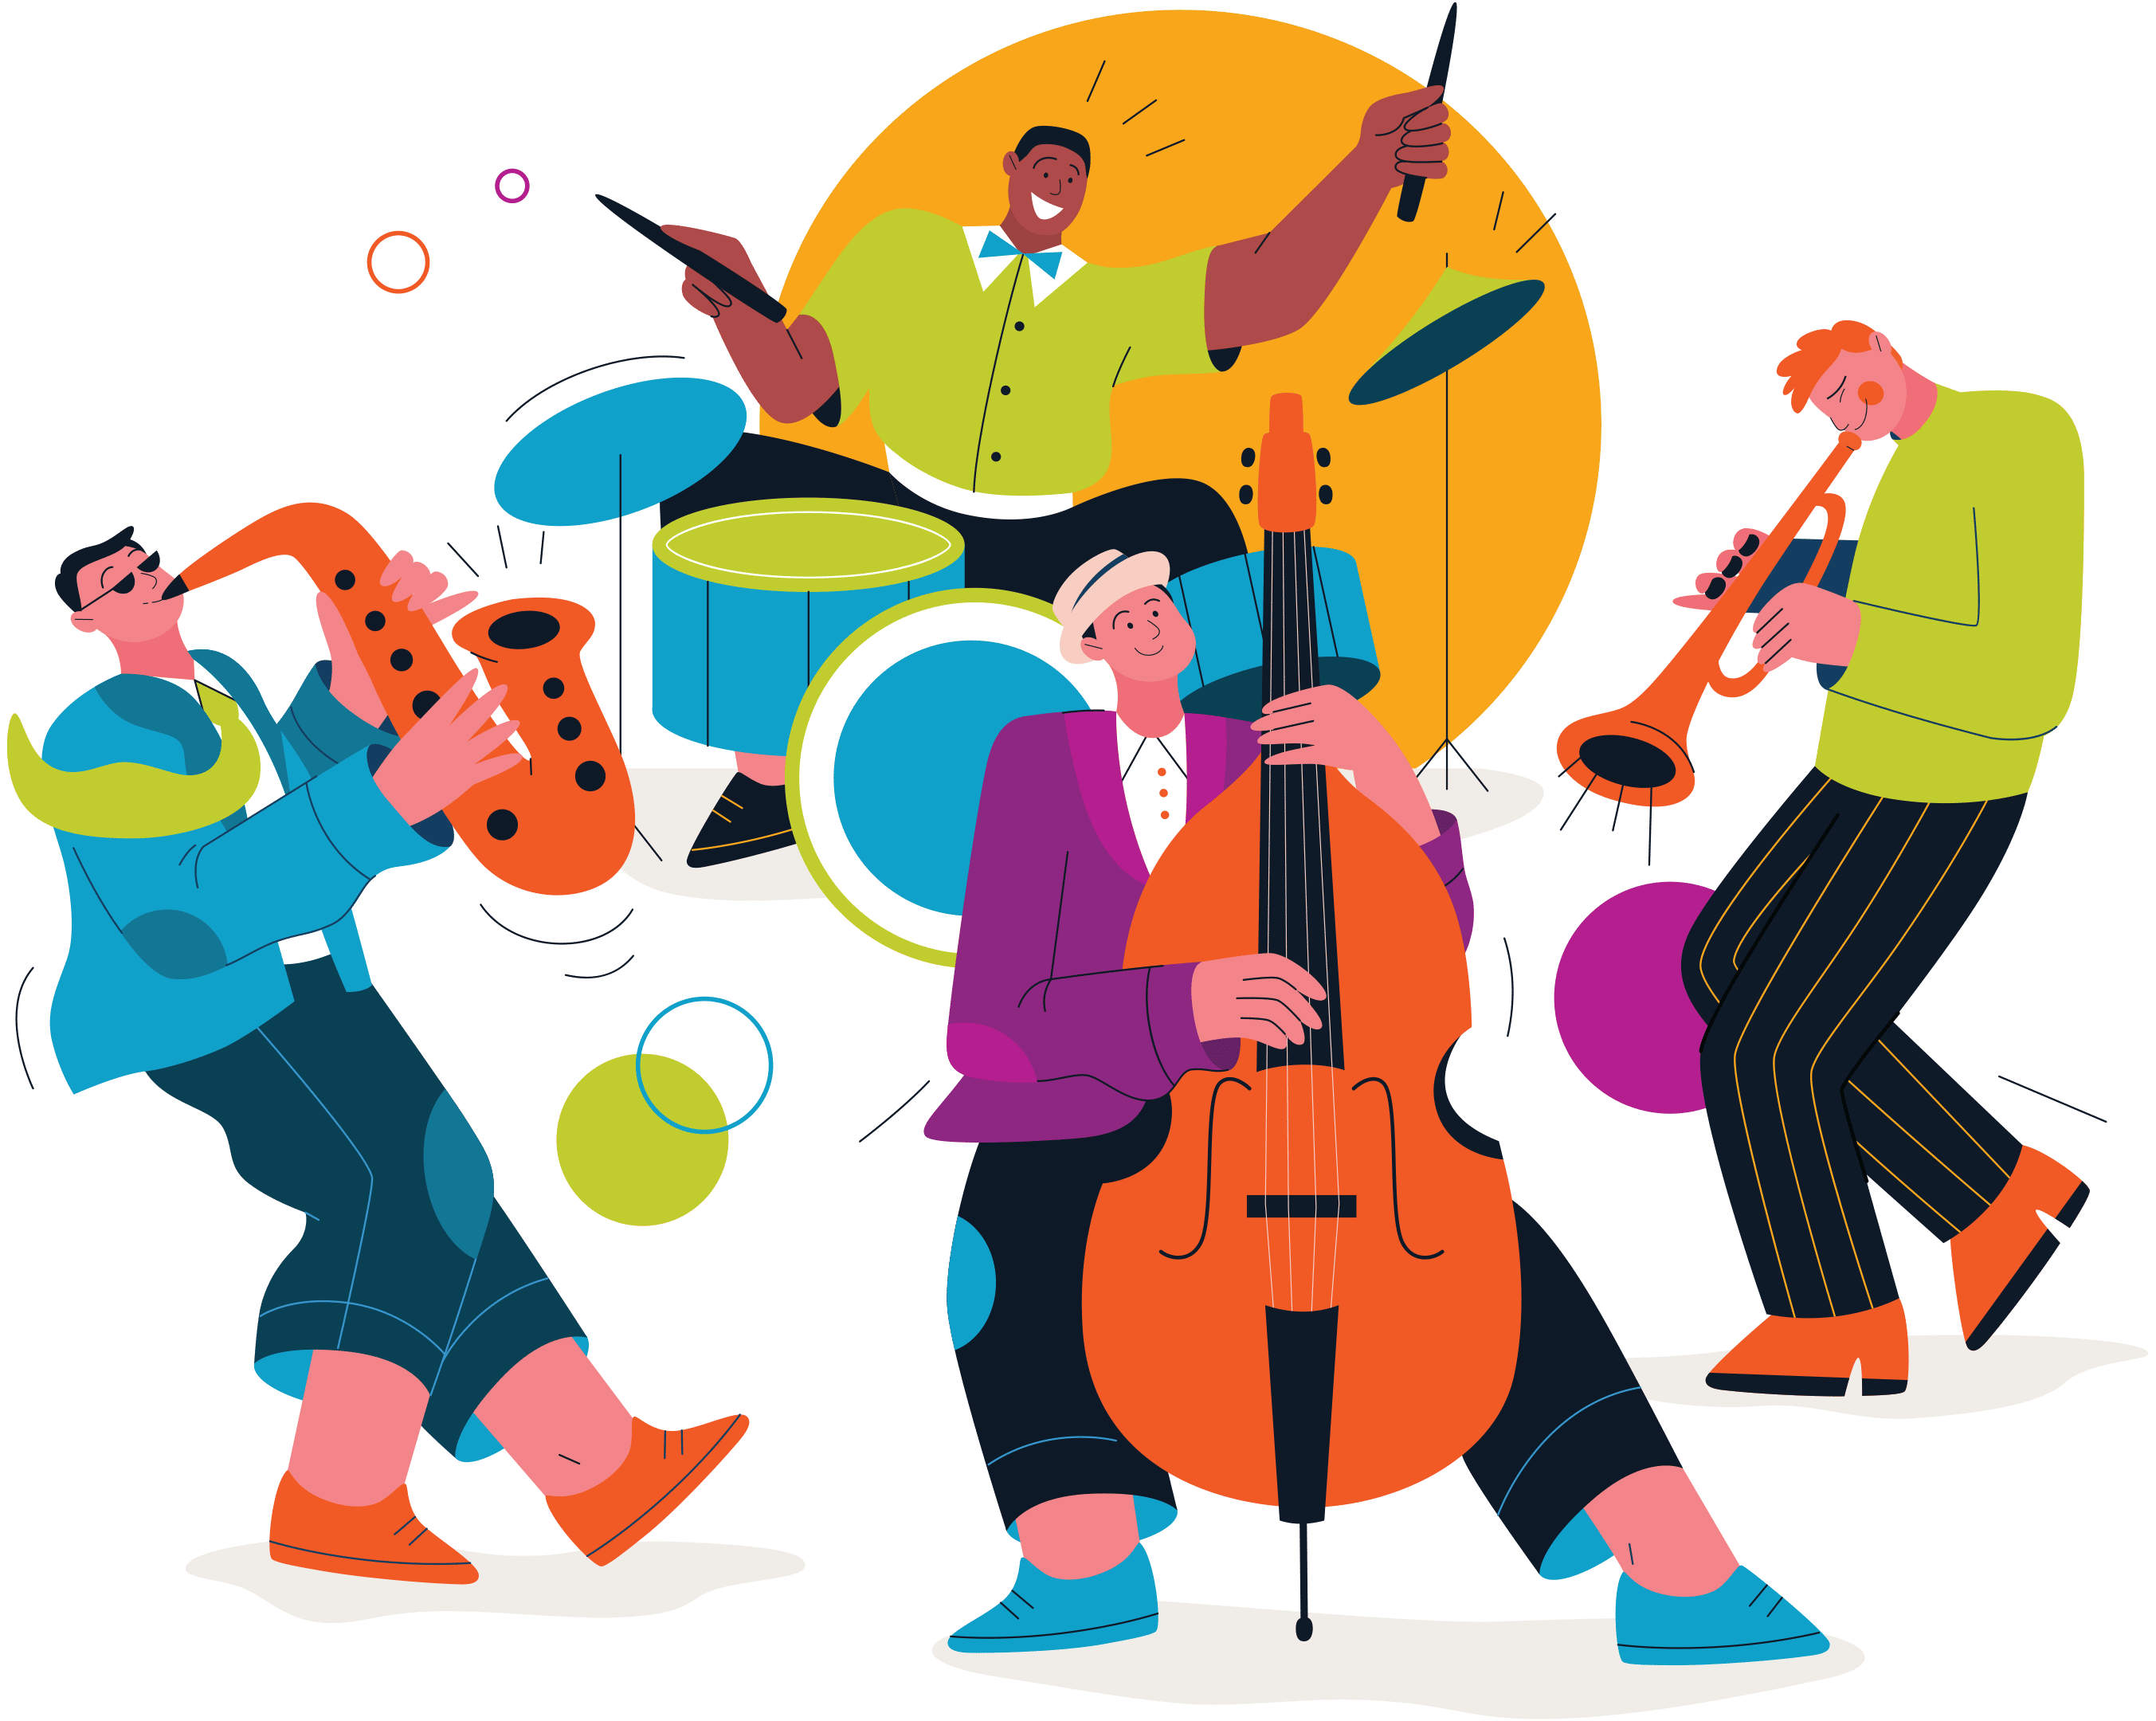 An illustrated jazz band